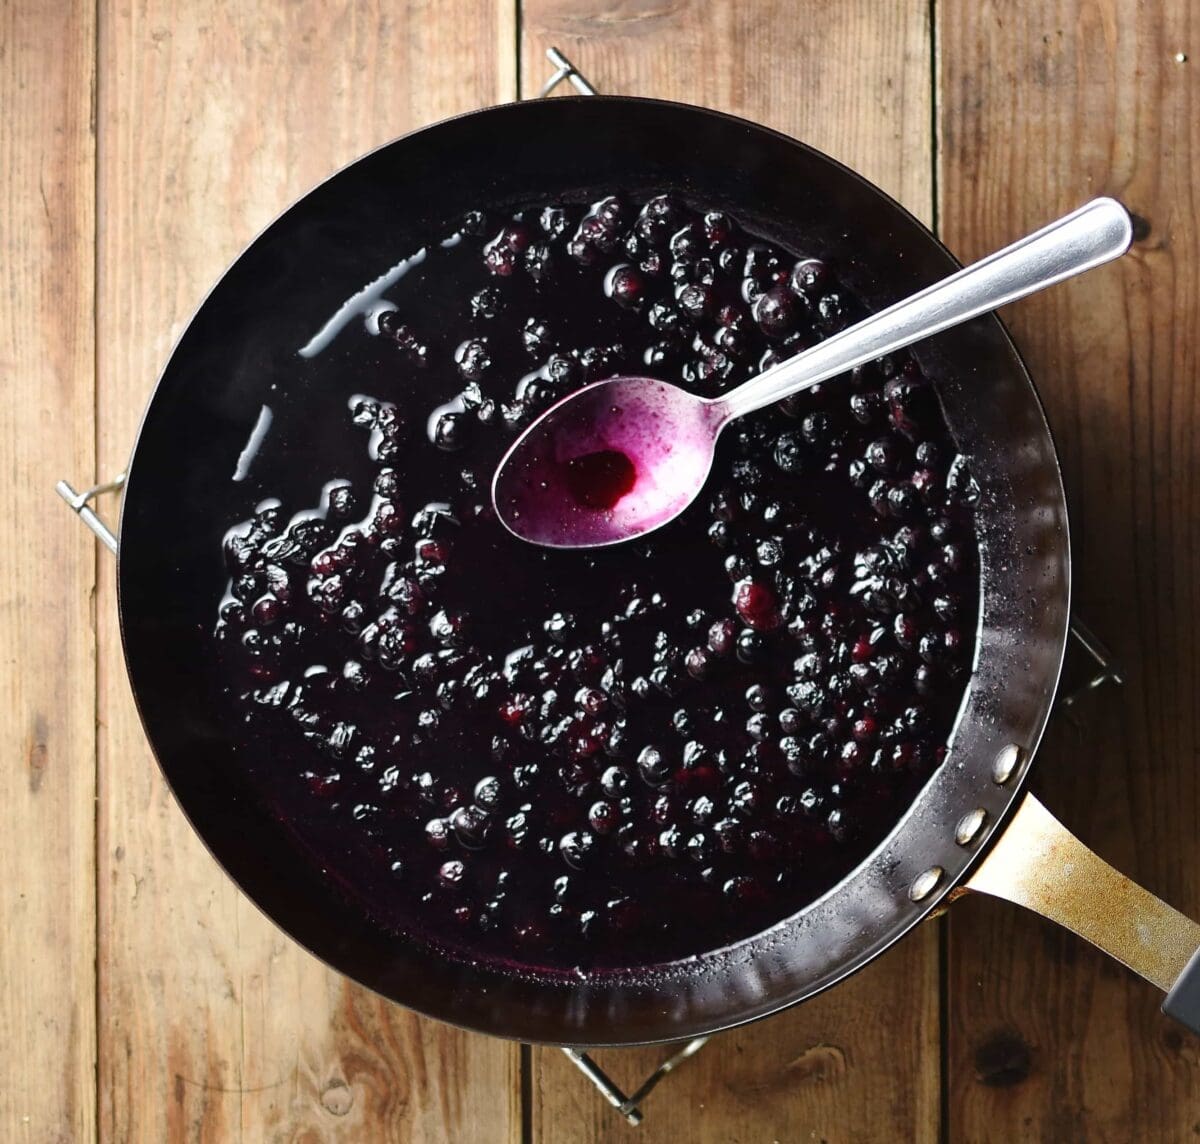 Top down view of blueberry sauce with spoon inside small pan.